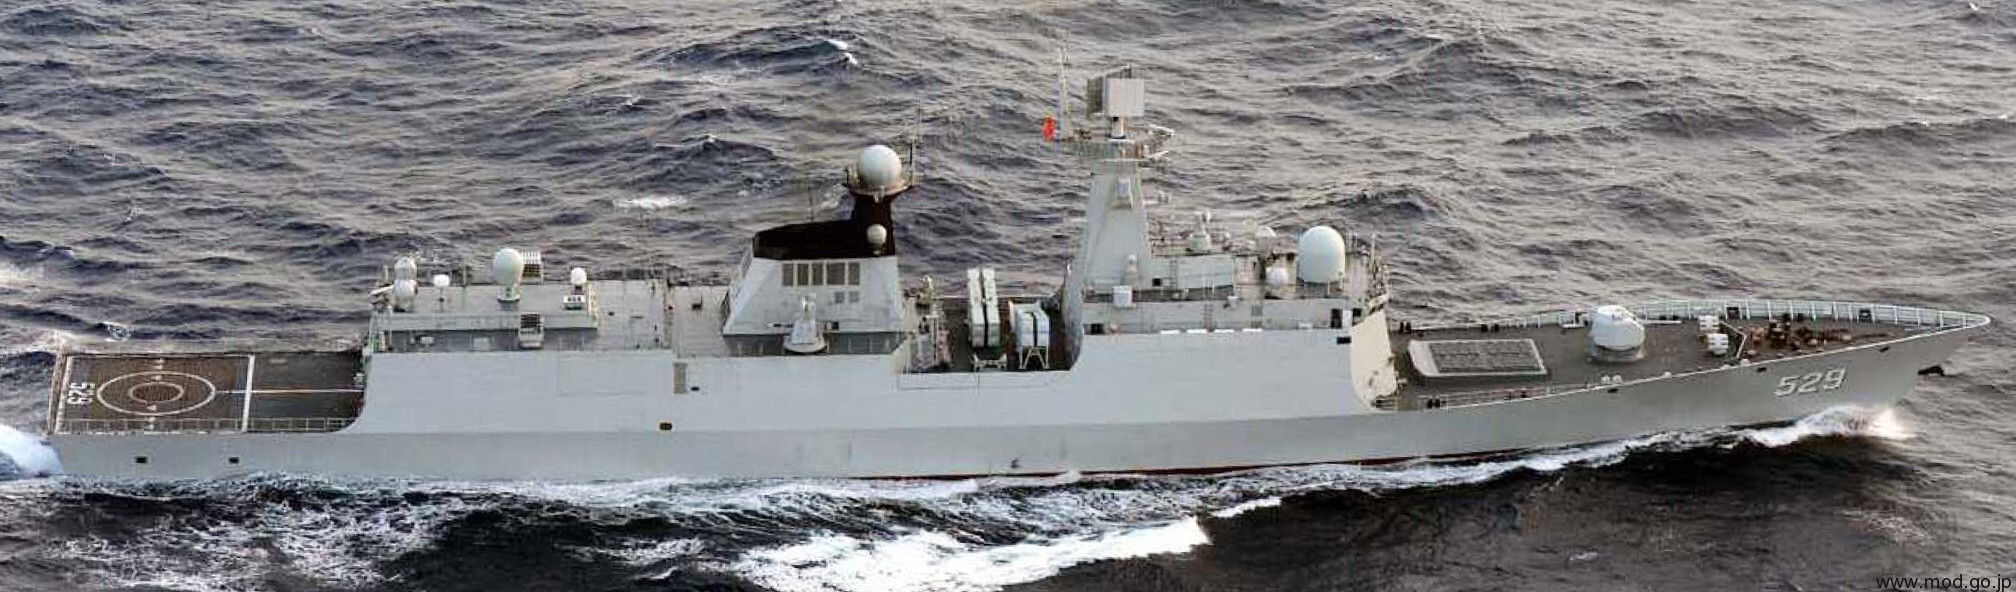 ffg-529 plans zhoushan type 054a jiangkai ii class guided missile frigate china people's liberation army navy 02